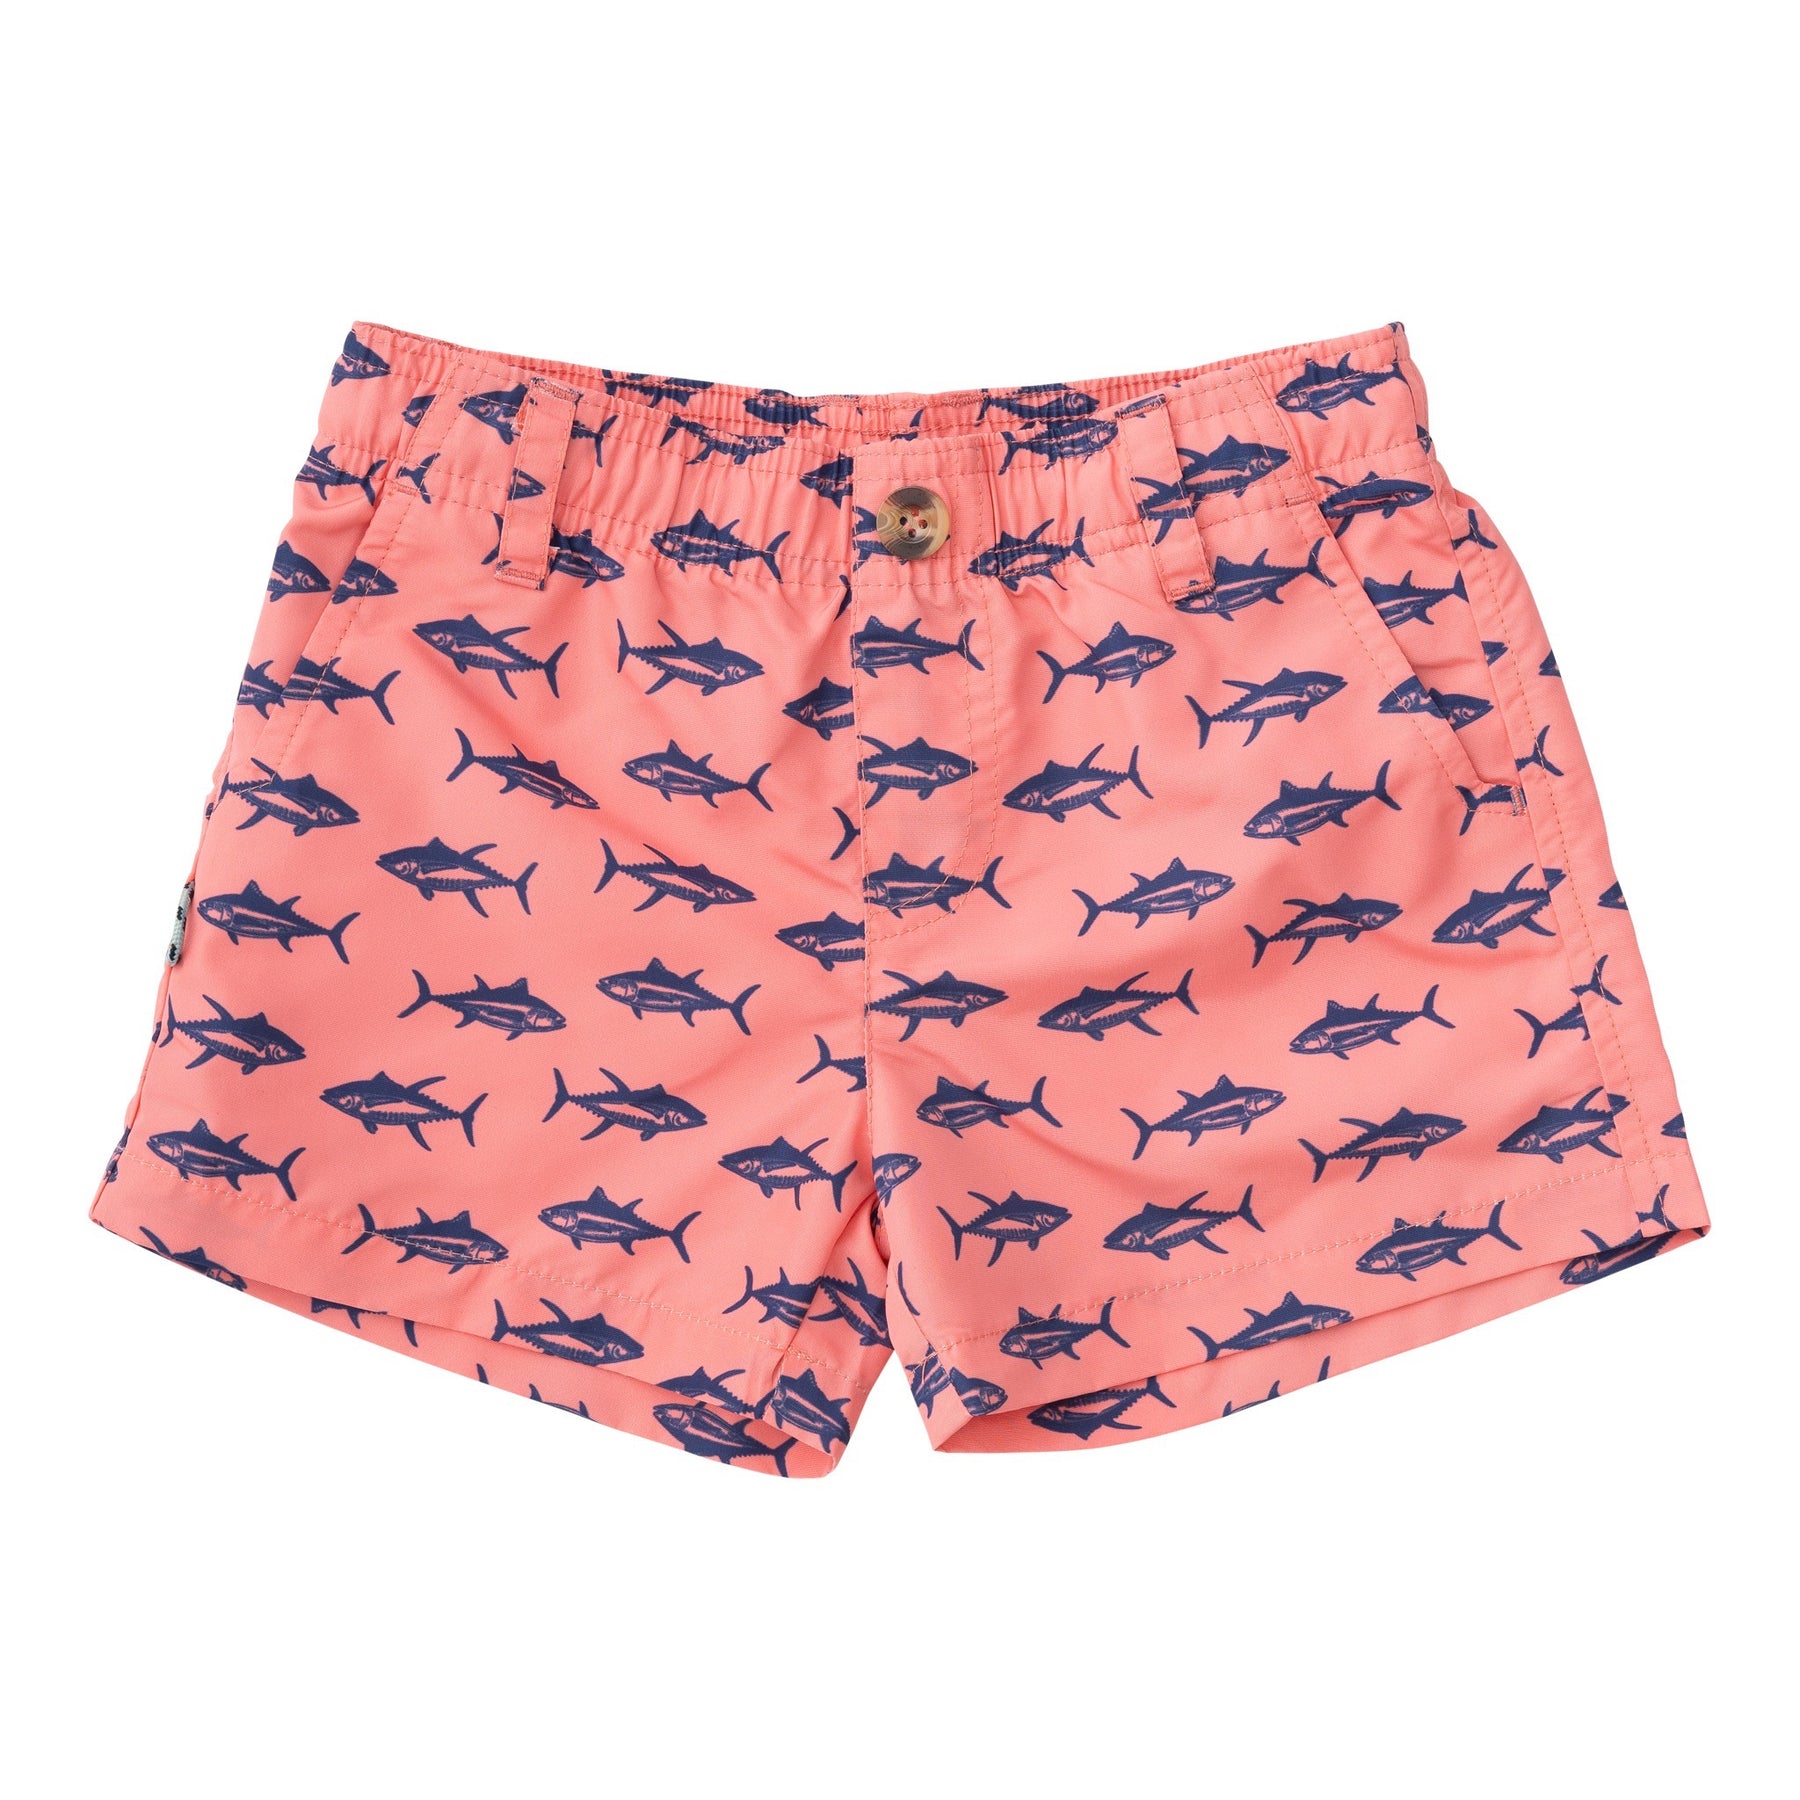 MakeMine Outrigger Performance Short in Twin Tuna Print - Shell Pink Tuna Allover Print / 6